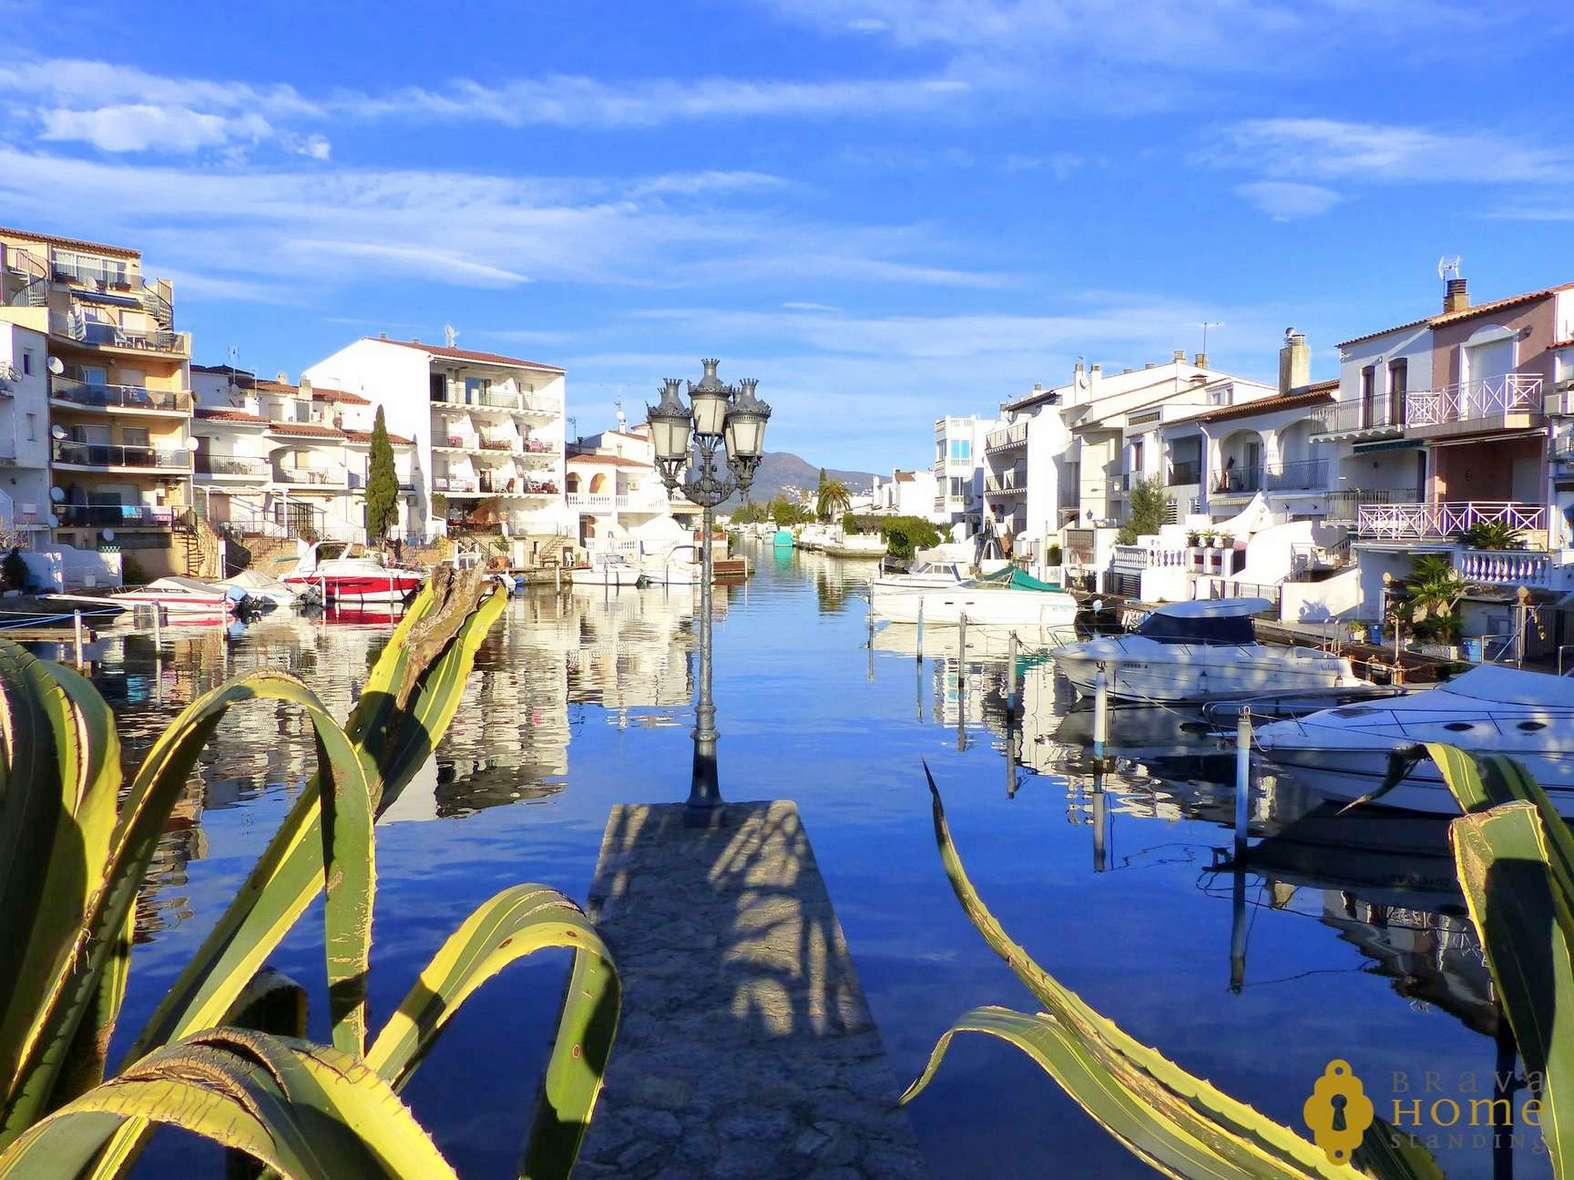 Nice apartment on the canal, with mooring and parking for sale in Empuriabrava